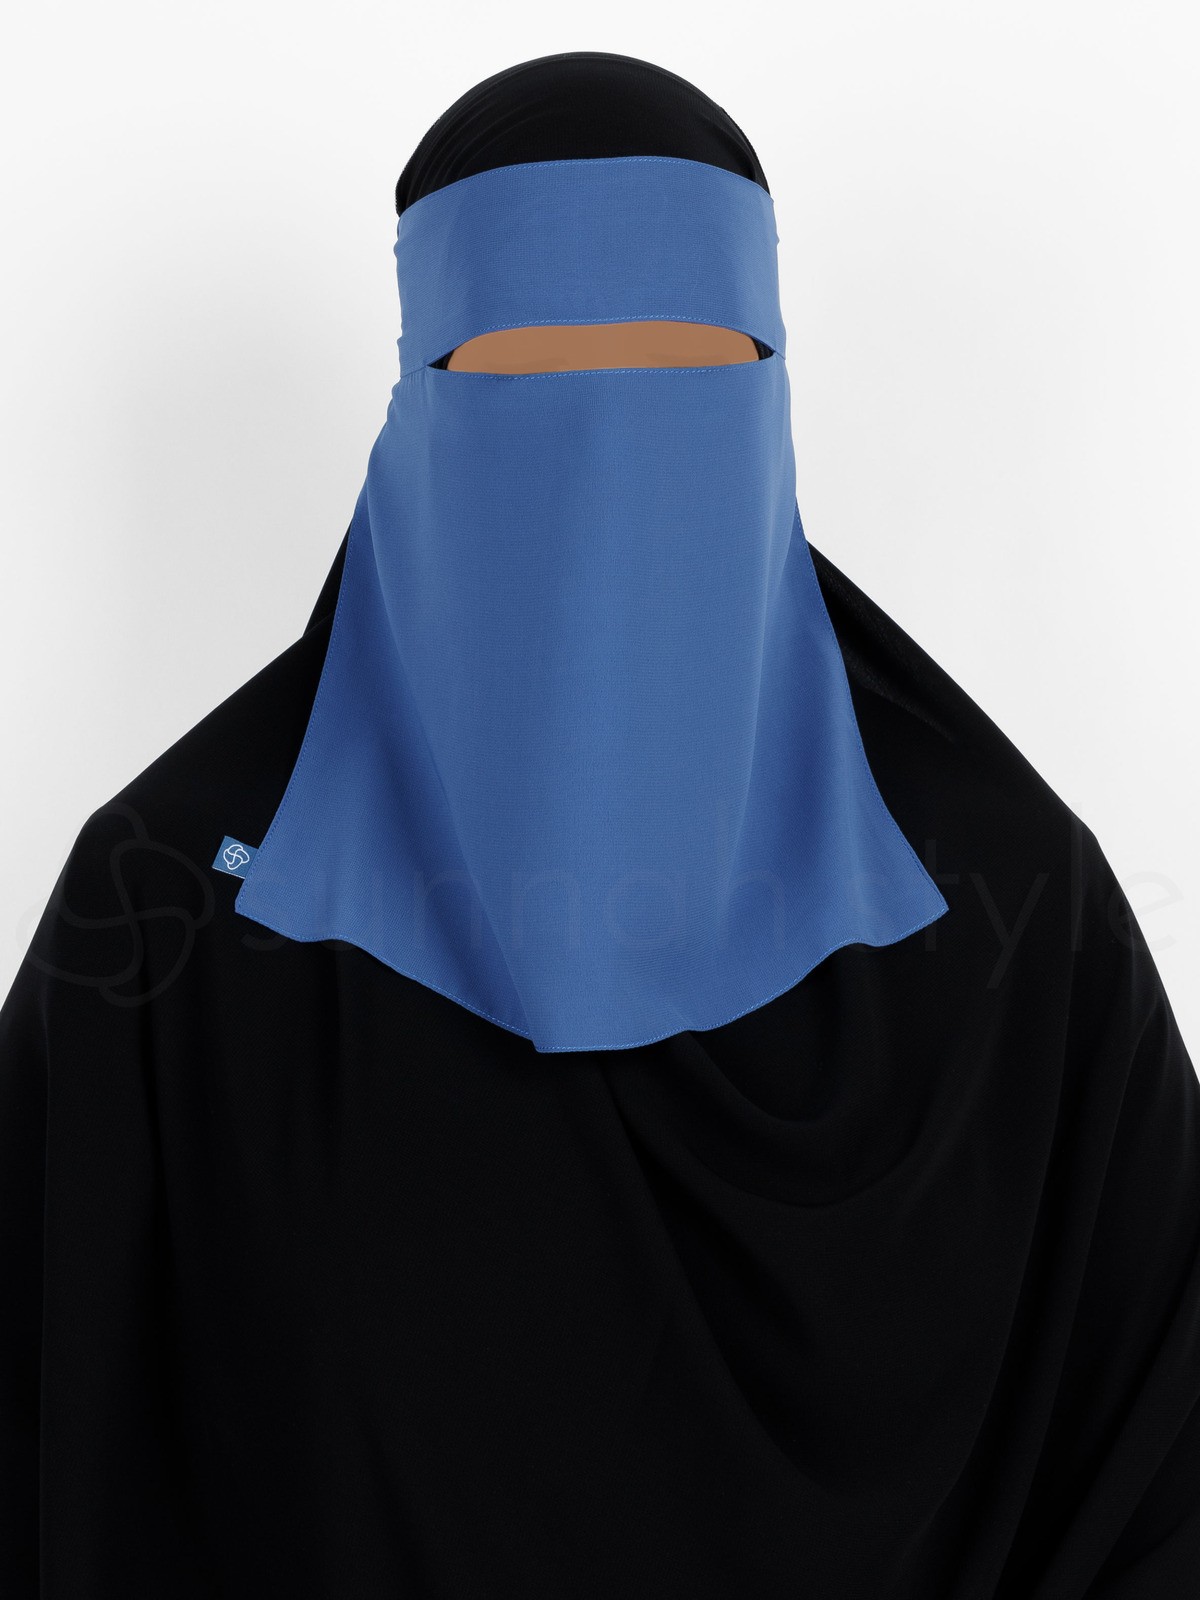 Sunnah Style - Short One Layer Niqab (Blue Jay)